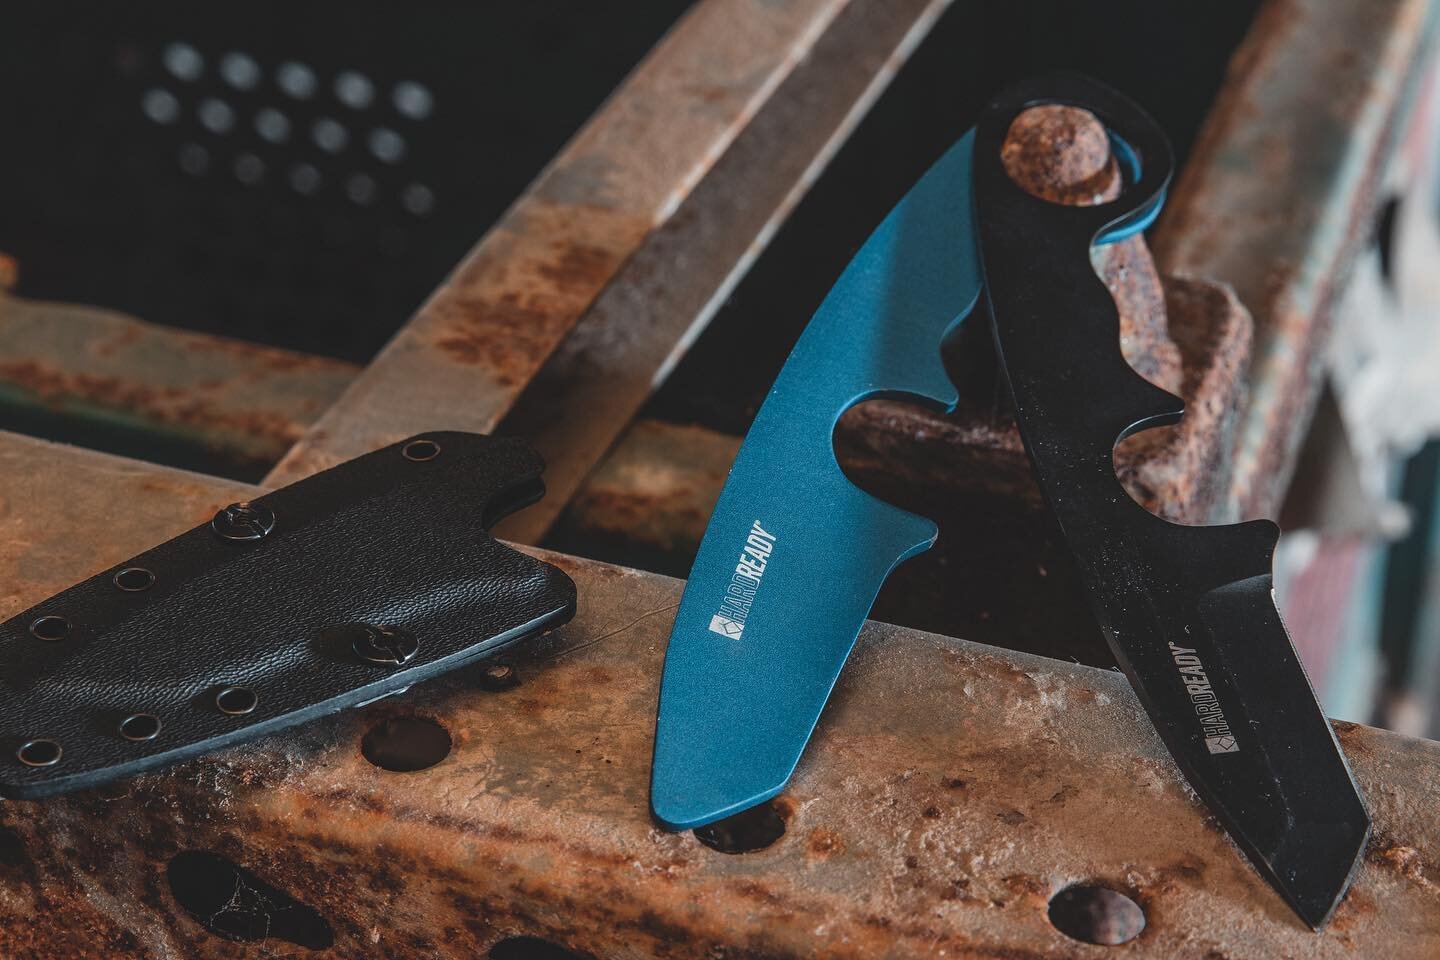 🔪 Defend with Confidence! The HR-1 Self-Defense Blade 🔪

Are you prepared to protect yourself and your loved ones? The HR-1 blade is your ultimate tool for personal safety. 💪

🔥 Key Features:
✅ Compact &amp; Discreet Design
✅ Razor-Sharp Blade
✅ 